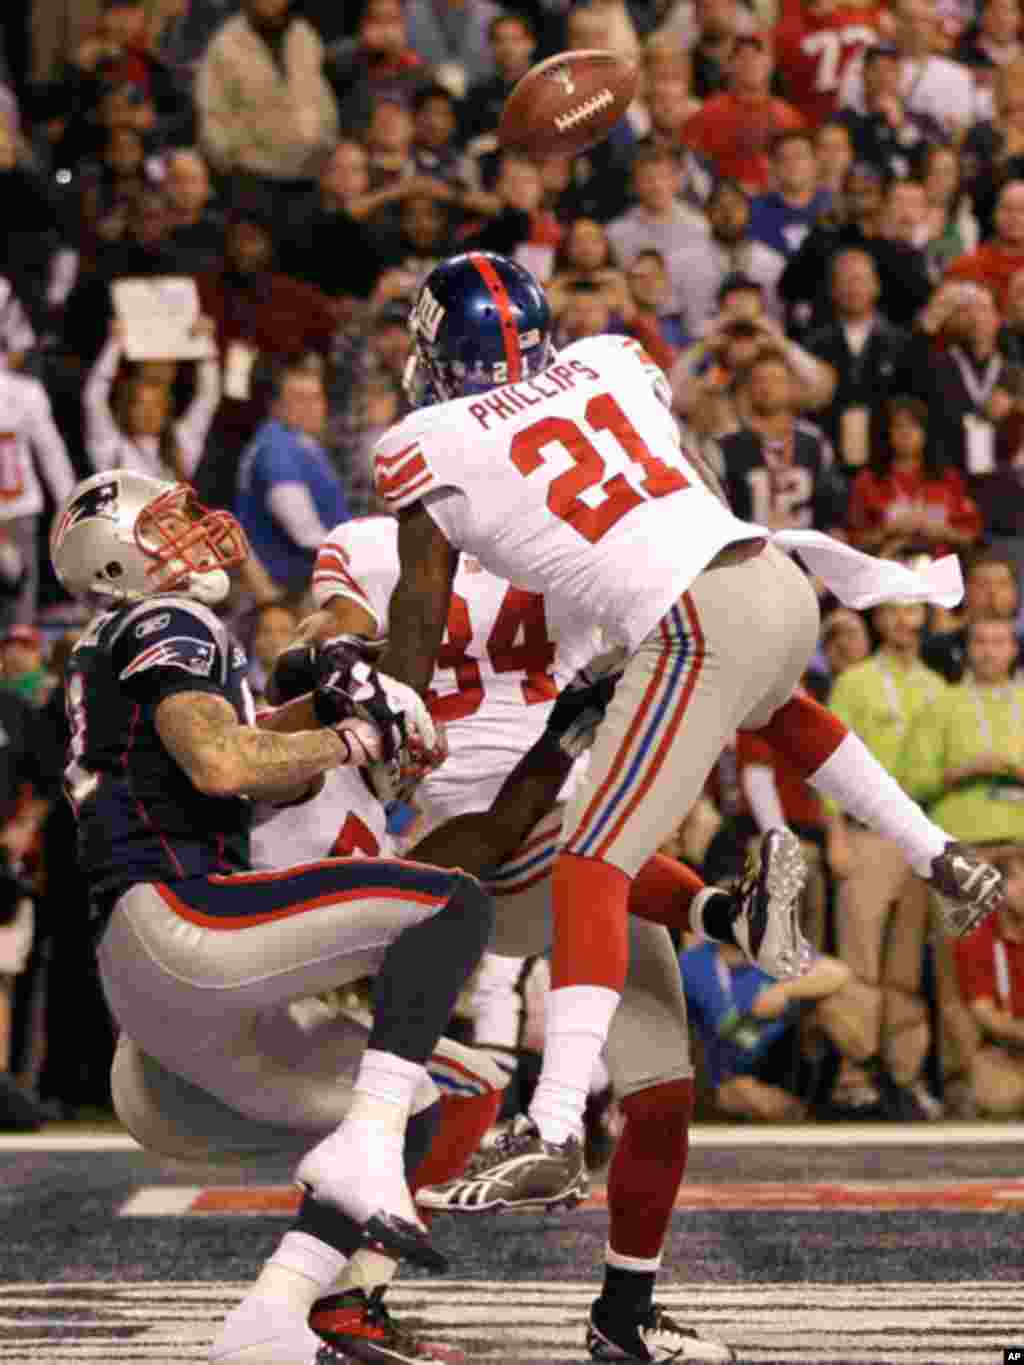 New York Giants safety Kenny Phillips (21) breaks up a pass intended for New England Patriots tight end Aaron Hernandez, left, during the second half of the NFL Super Bowl XLVI football game, Sunday, Feb. 5, 2012, in Indianapolis. The Giants won 21-17.